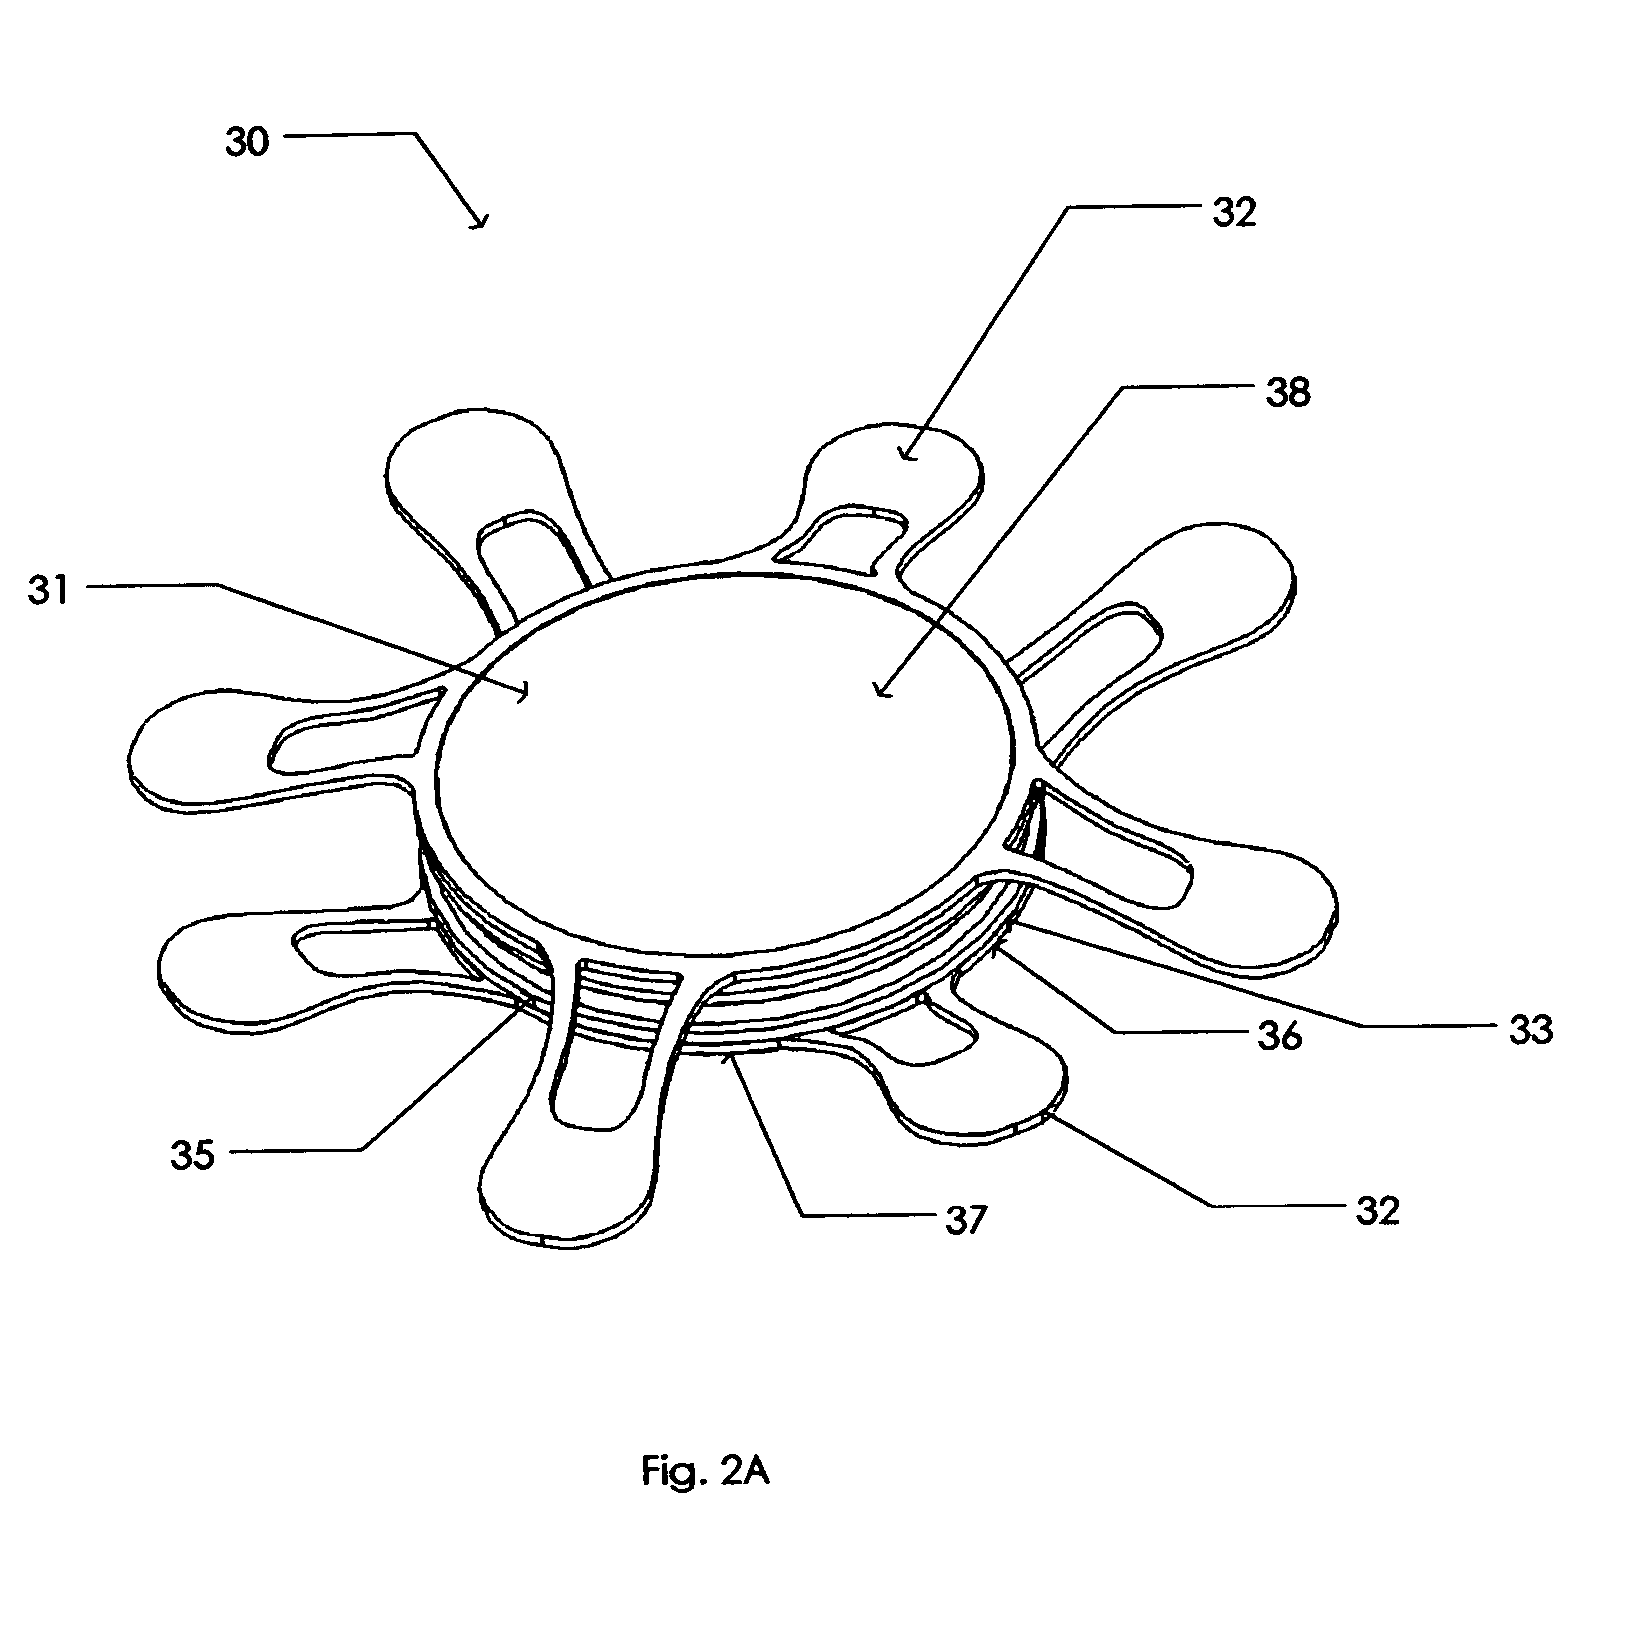 Implantable chamber for biological induction or enhancement of muscle contraction